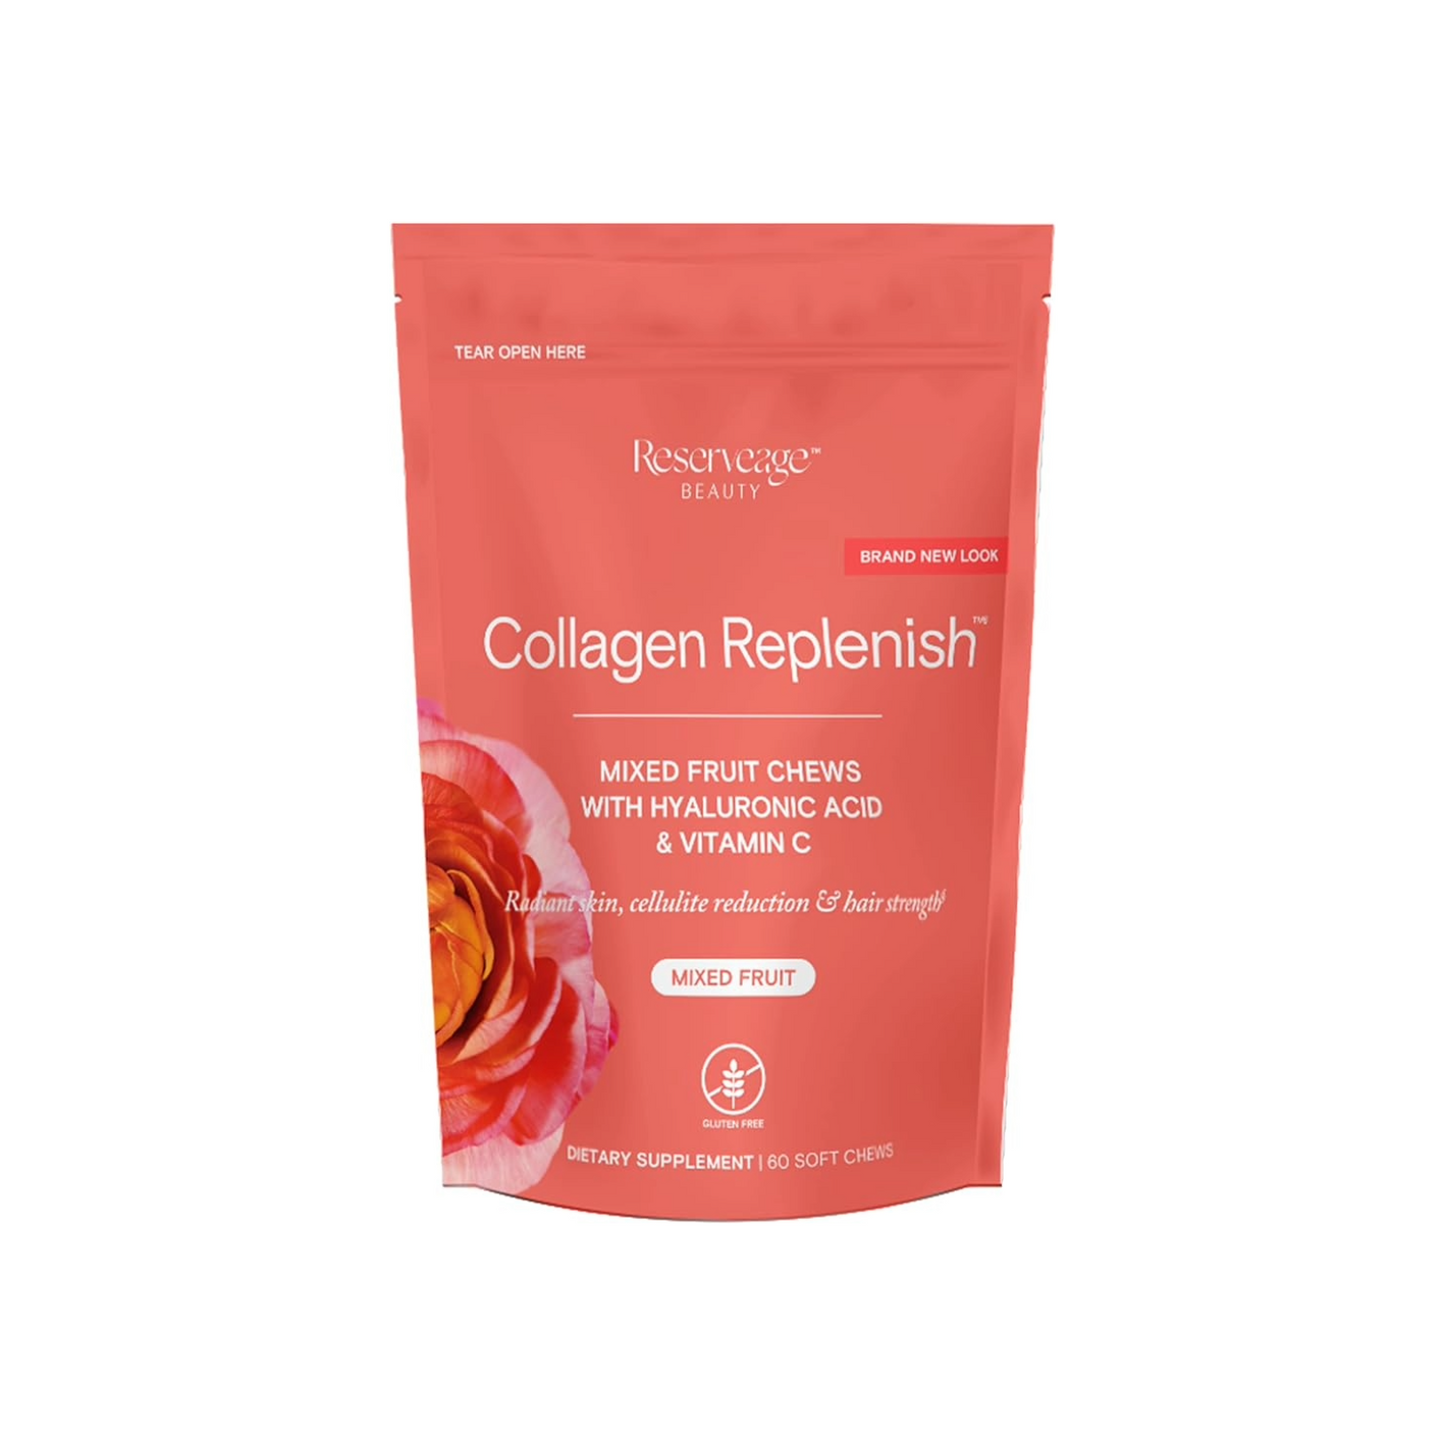 Reserveage Beauty Collagen Replenish Chews for Skin Care Hair & Nail Growth - 60 Soft Chews (20 Servings)